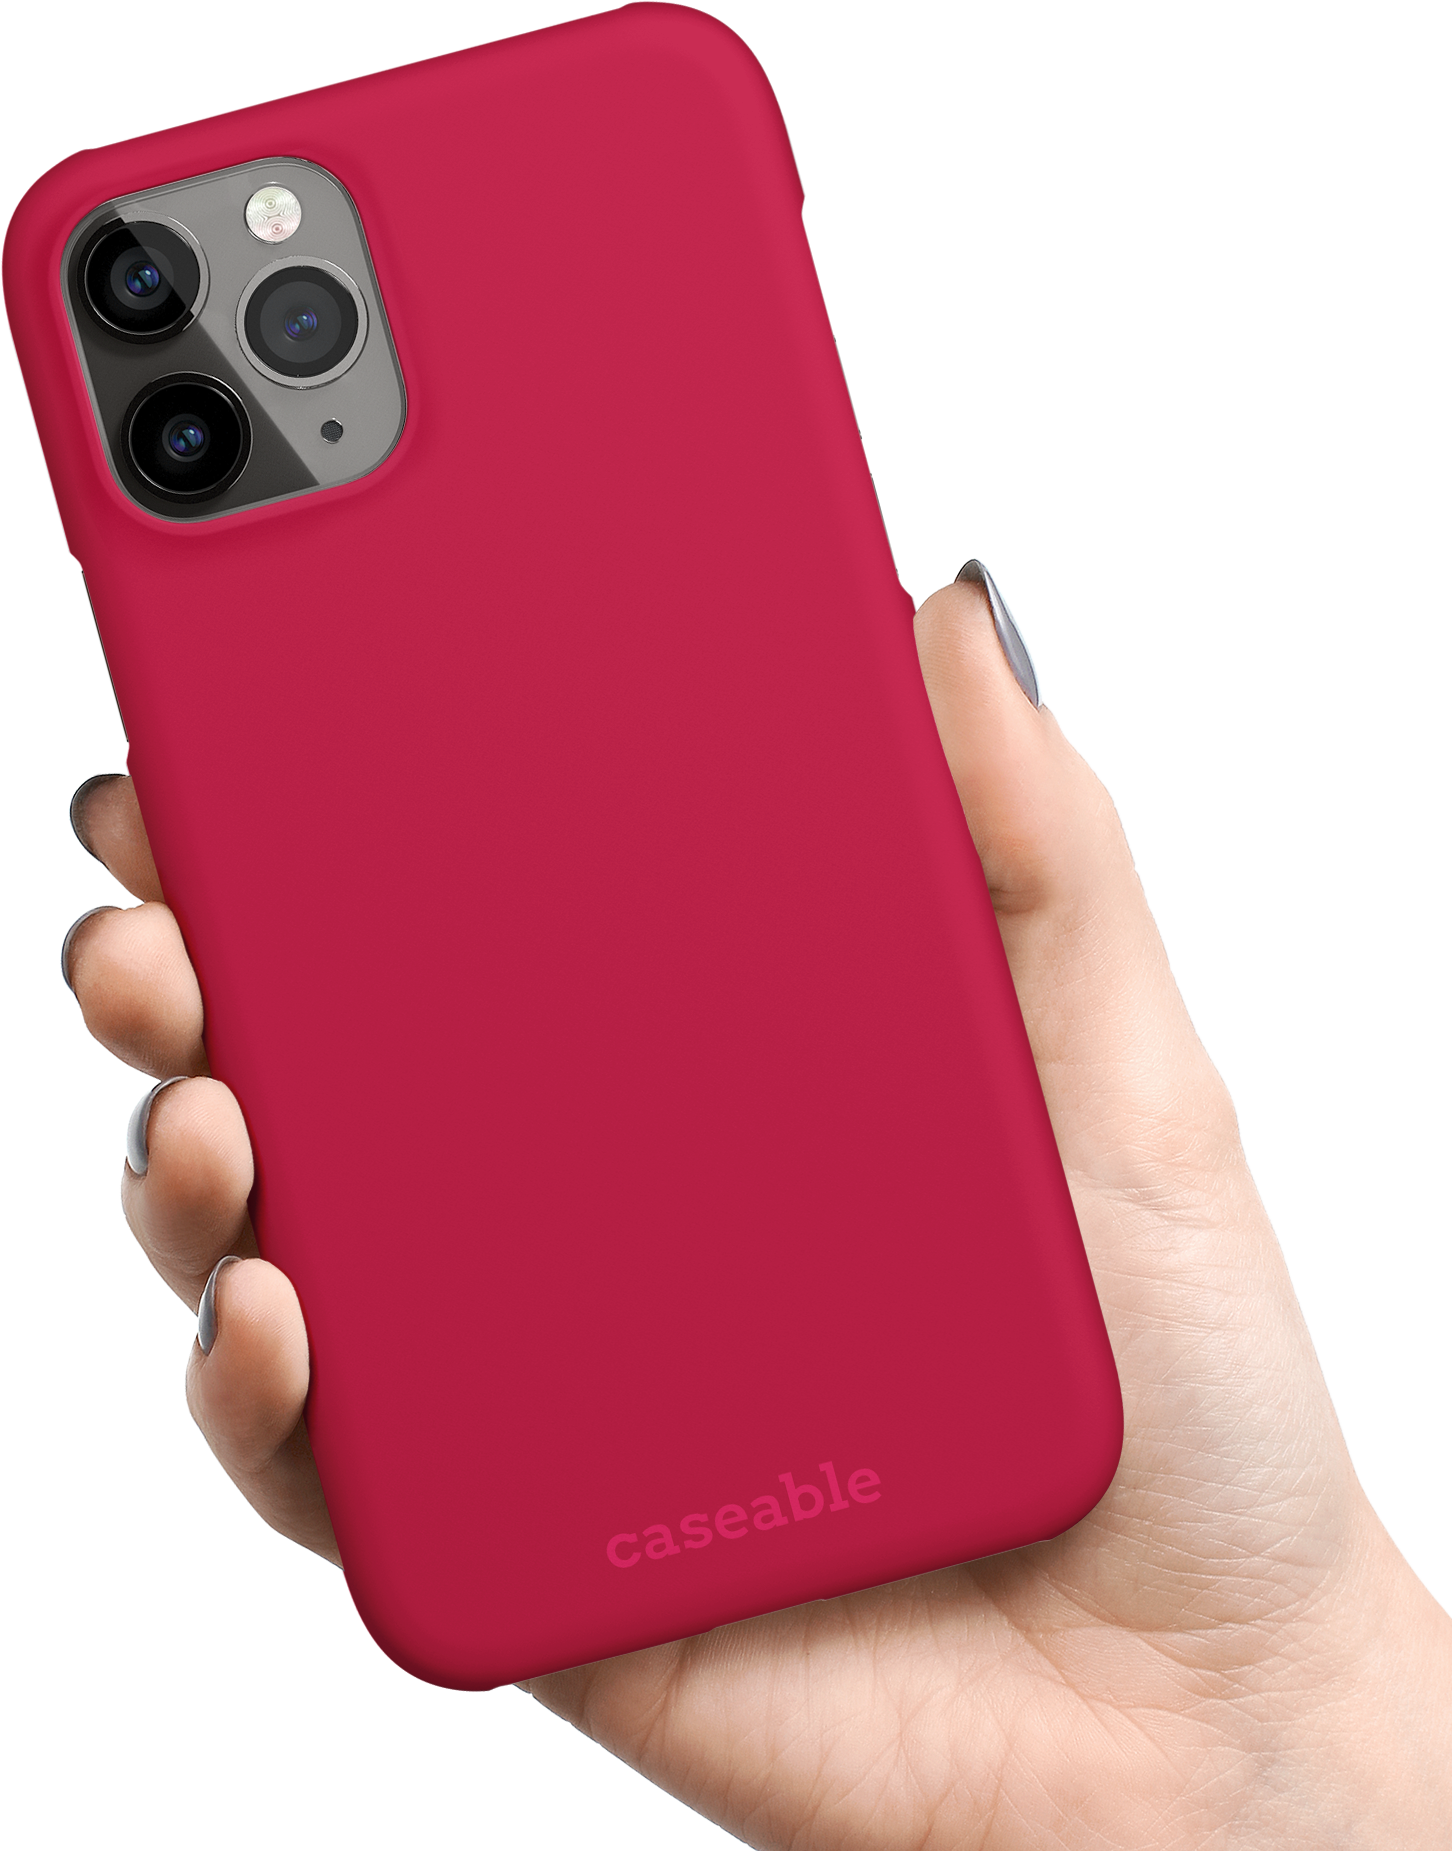 RED Hard Shell Phone Case Apple iPhone 11 Pro held in hand